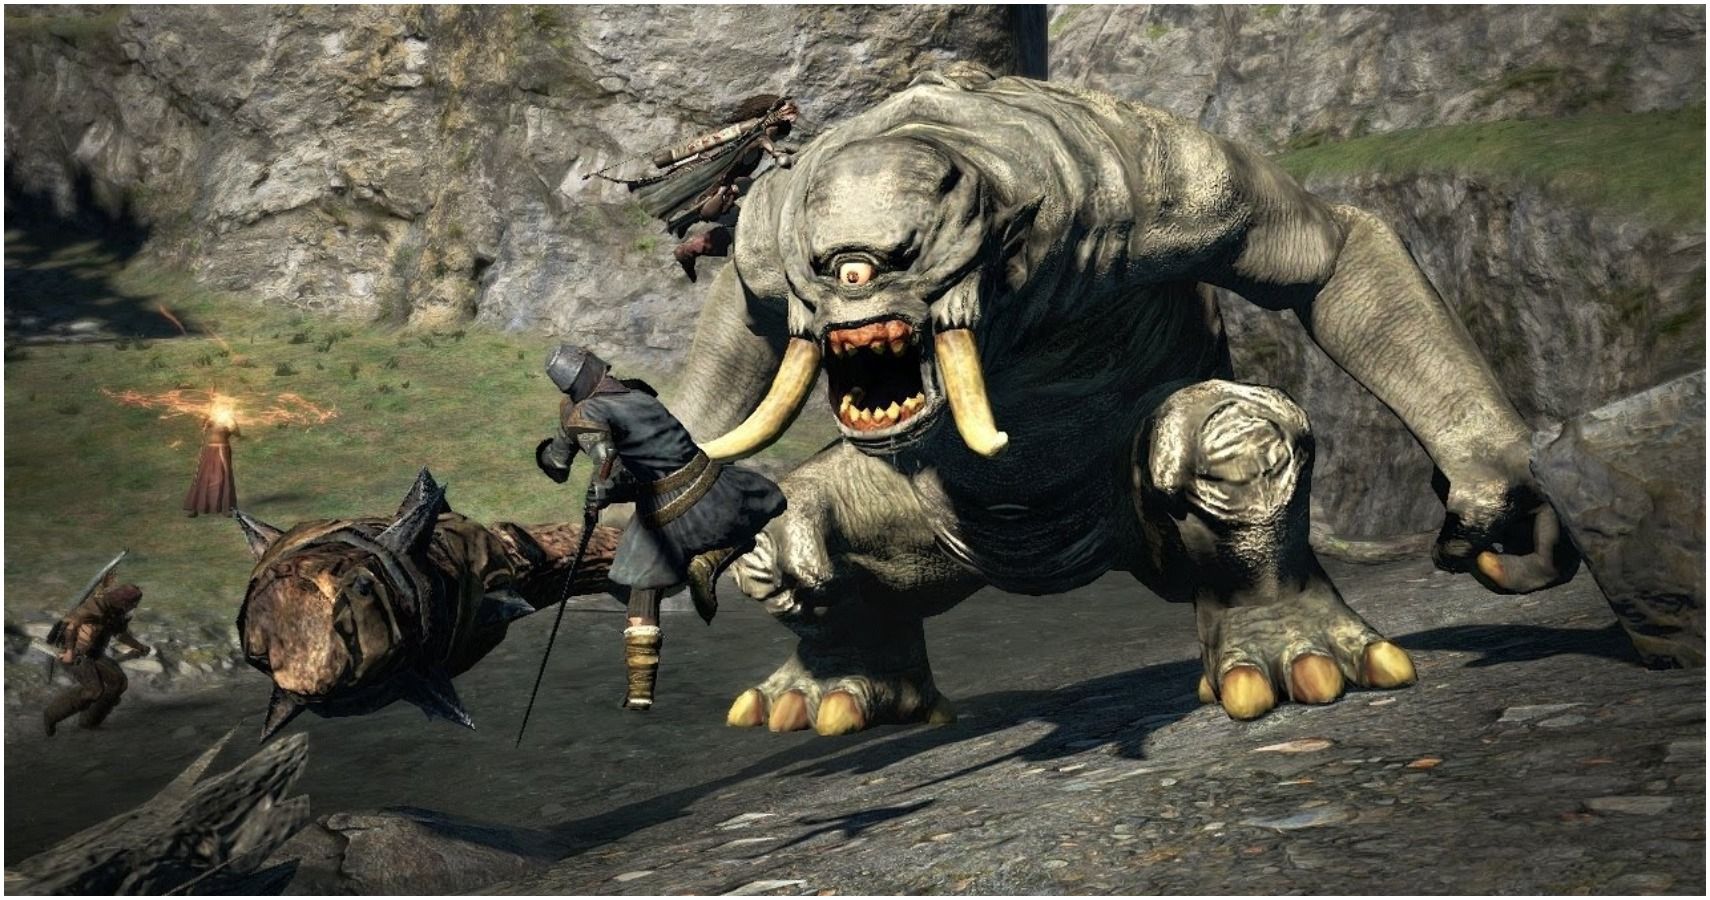 Dragon S Dogma Is Being Turned Into An Anime Series For Netflix